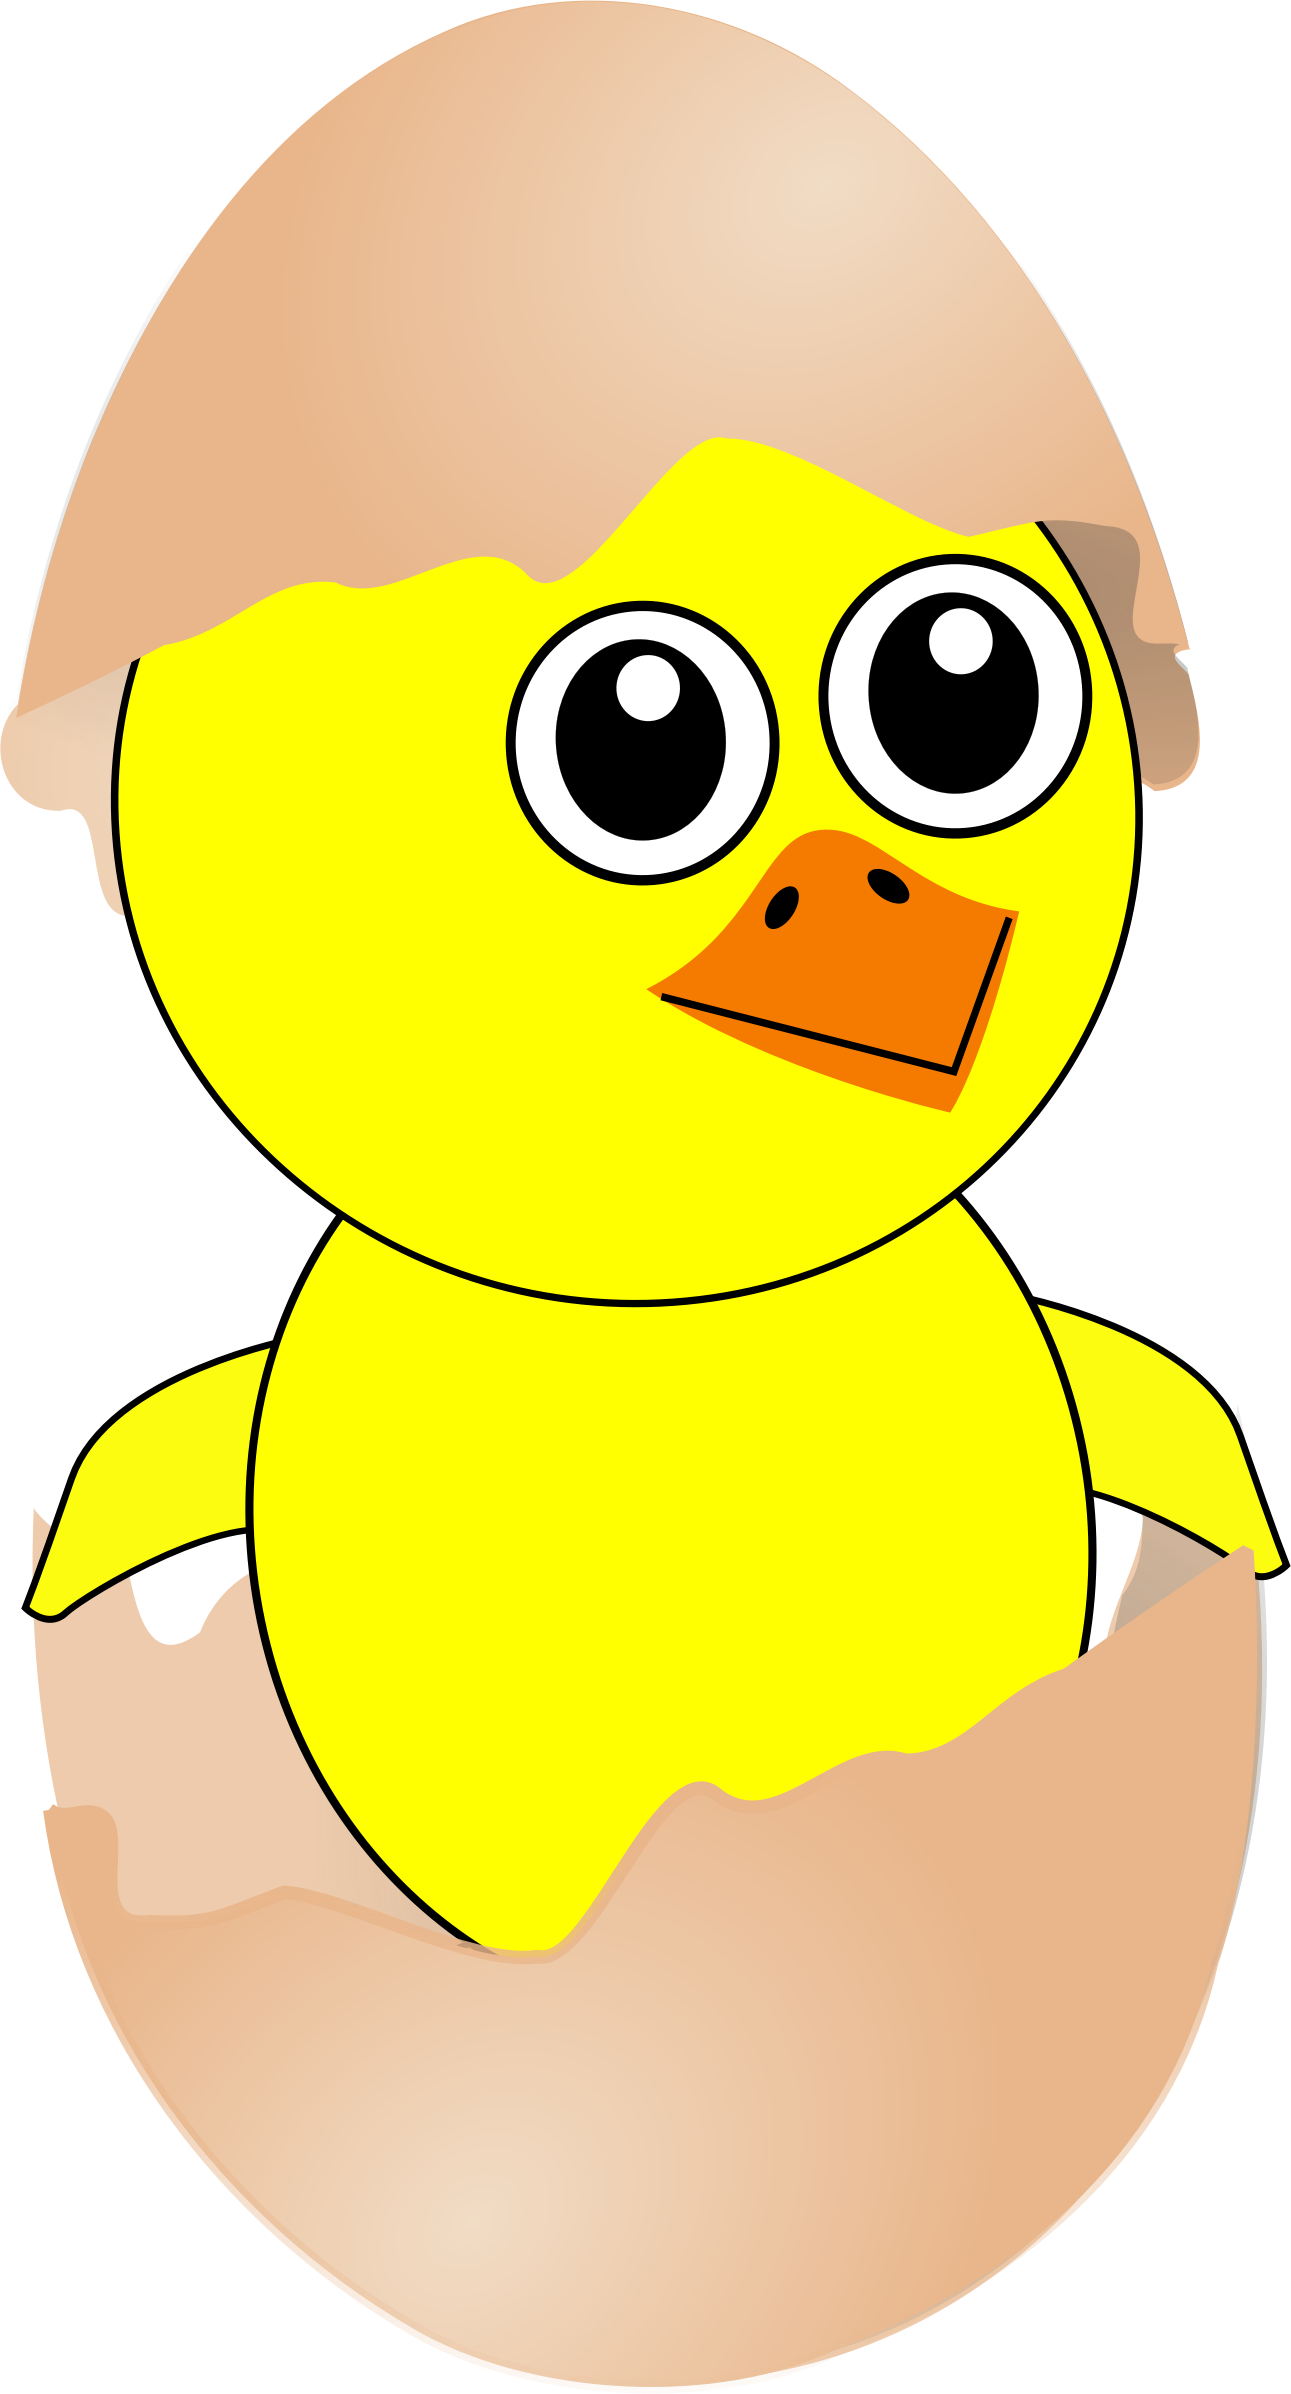 Easter Chick Cartoon Hd Photo Clipart